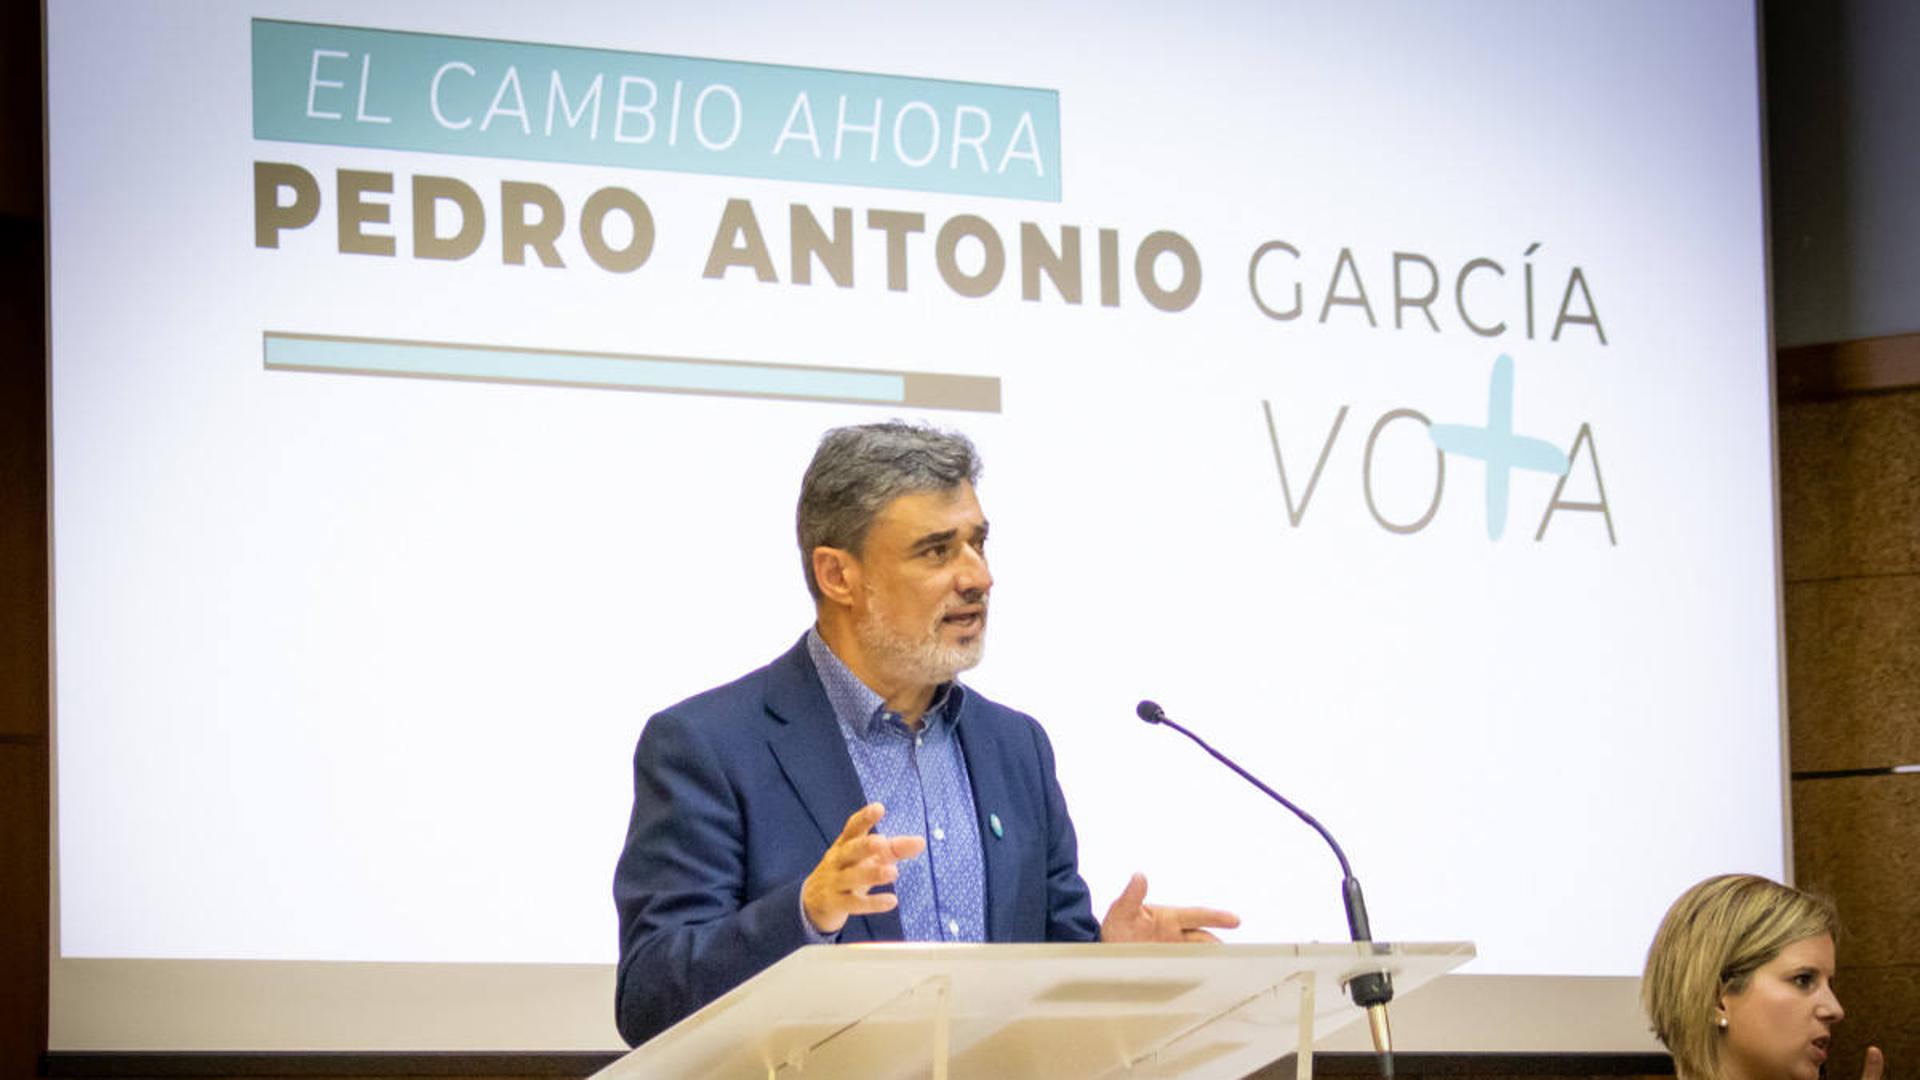 Pedro García is committed to taking care of the best values ​​of the UGR to lead “the change now”